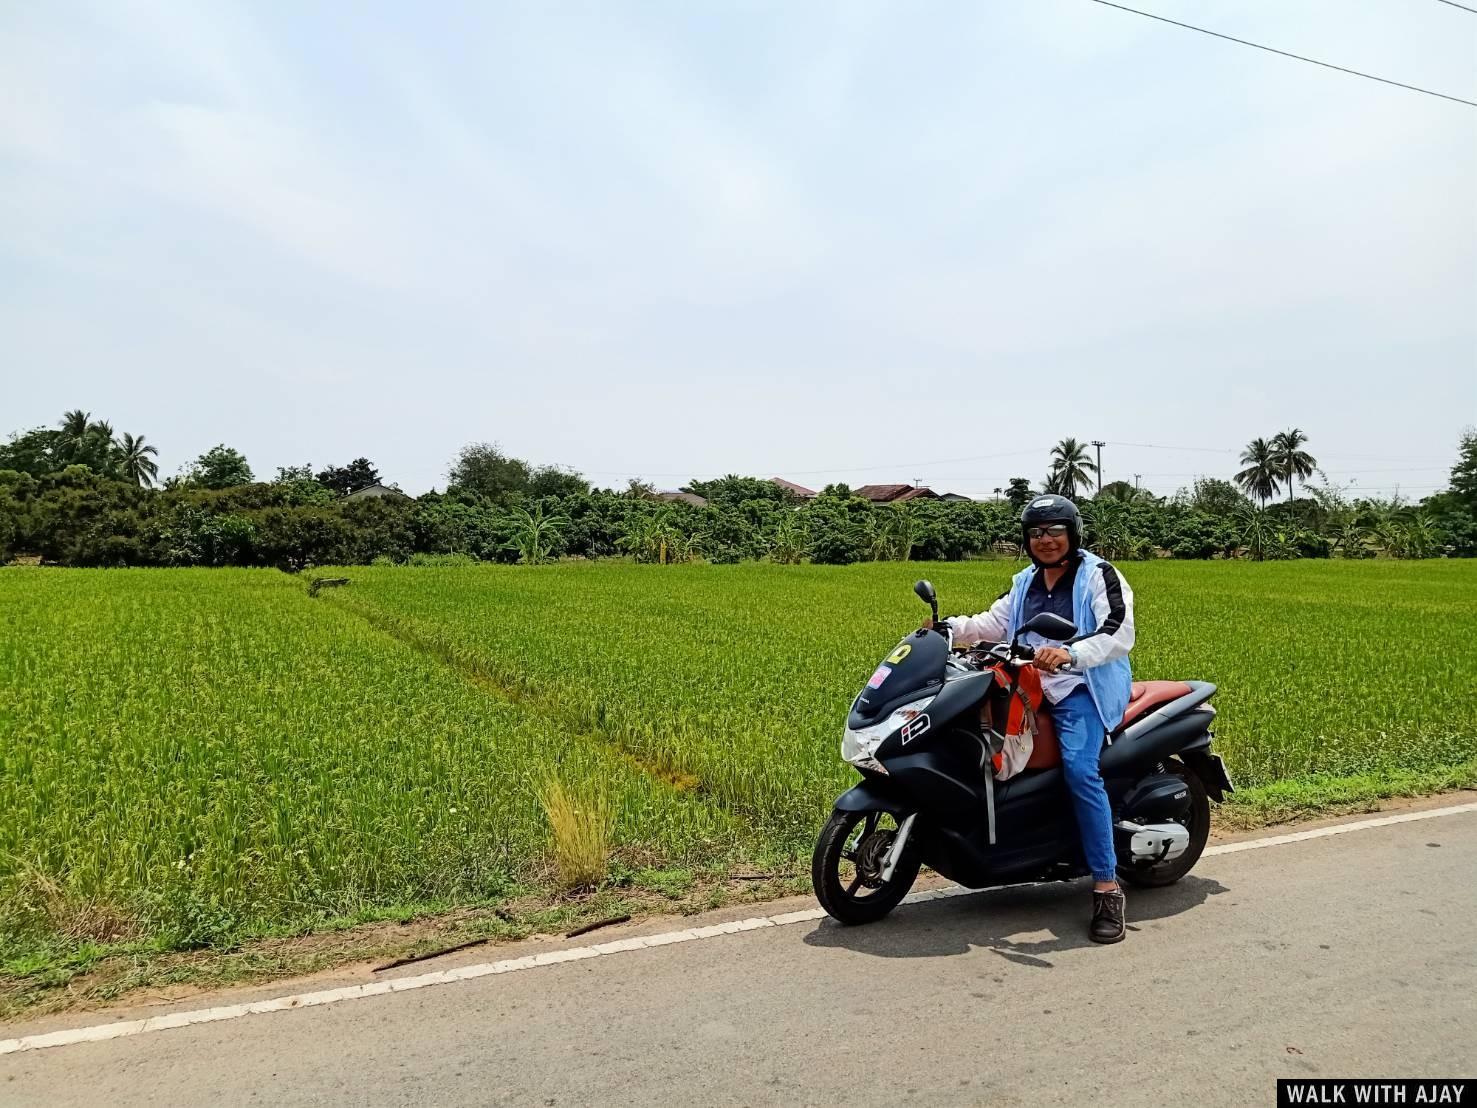 Driving Motorbike From Mae Klang Luang to Chiangmai : Thailand (Apr’21) – Day 6 46